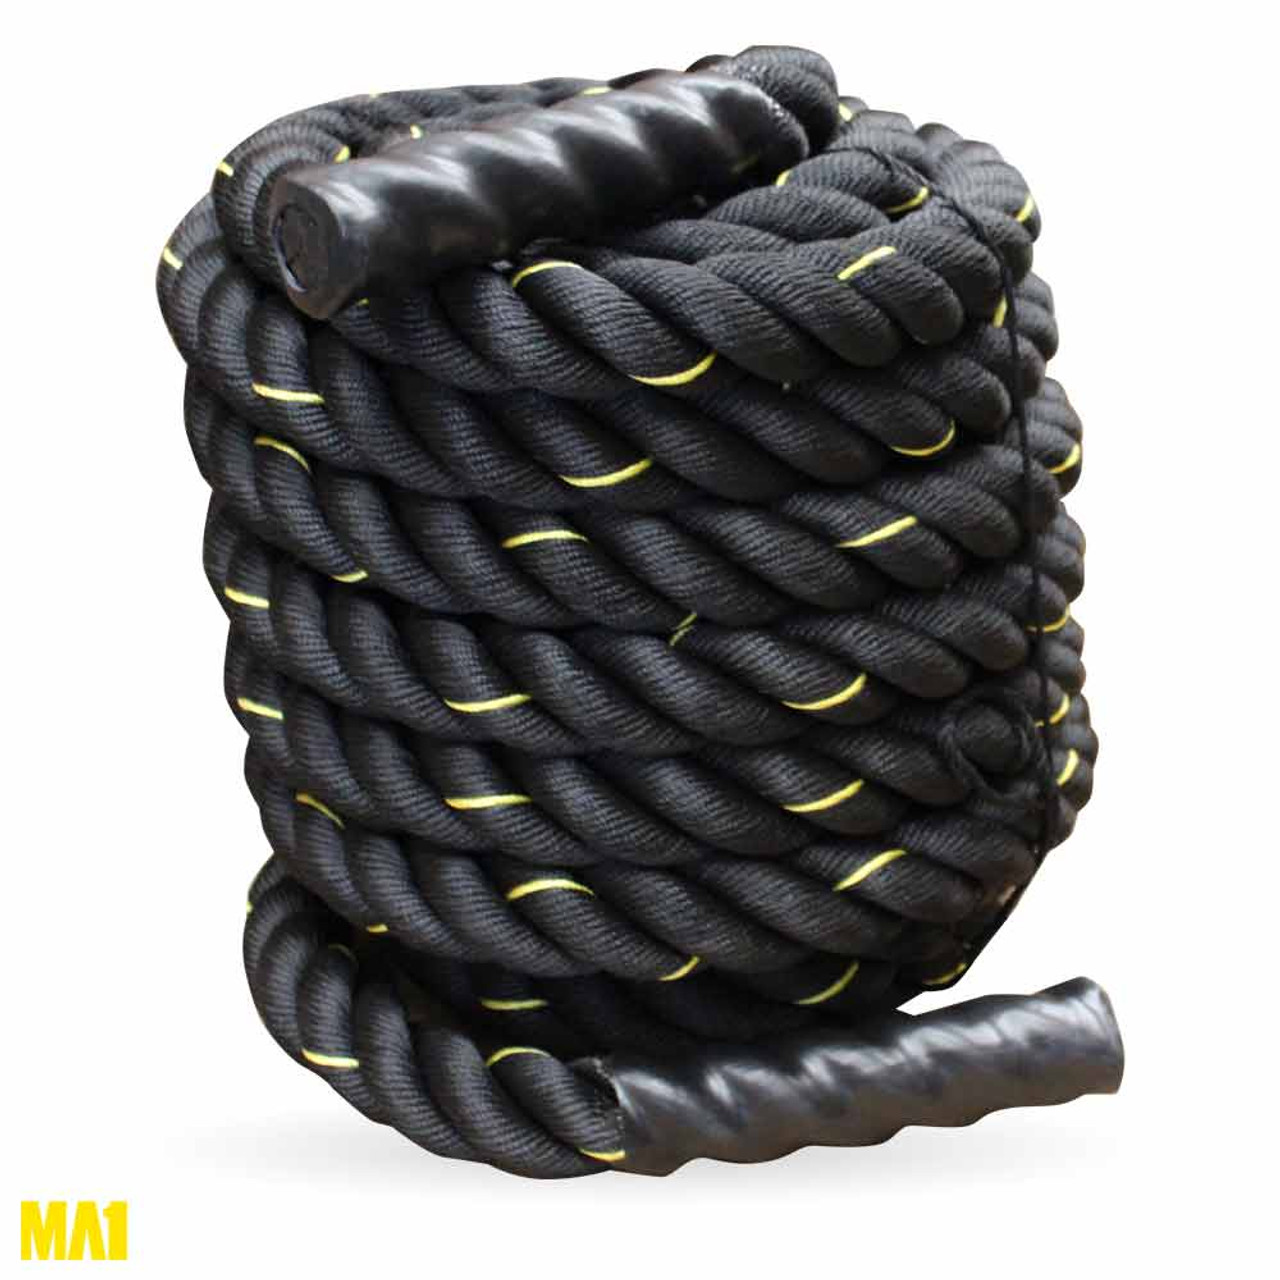 MA1 Battling Rope 2 inch thick & 15m long